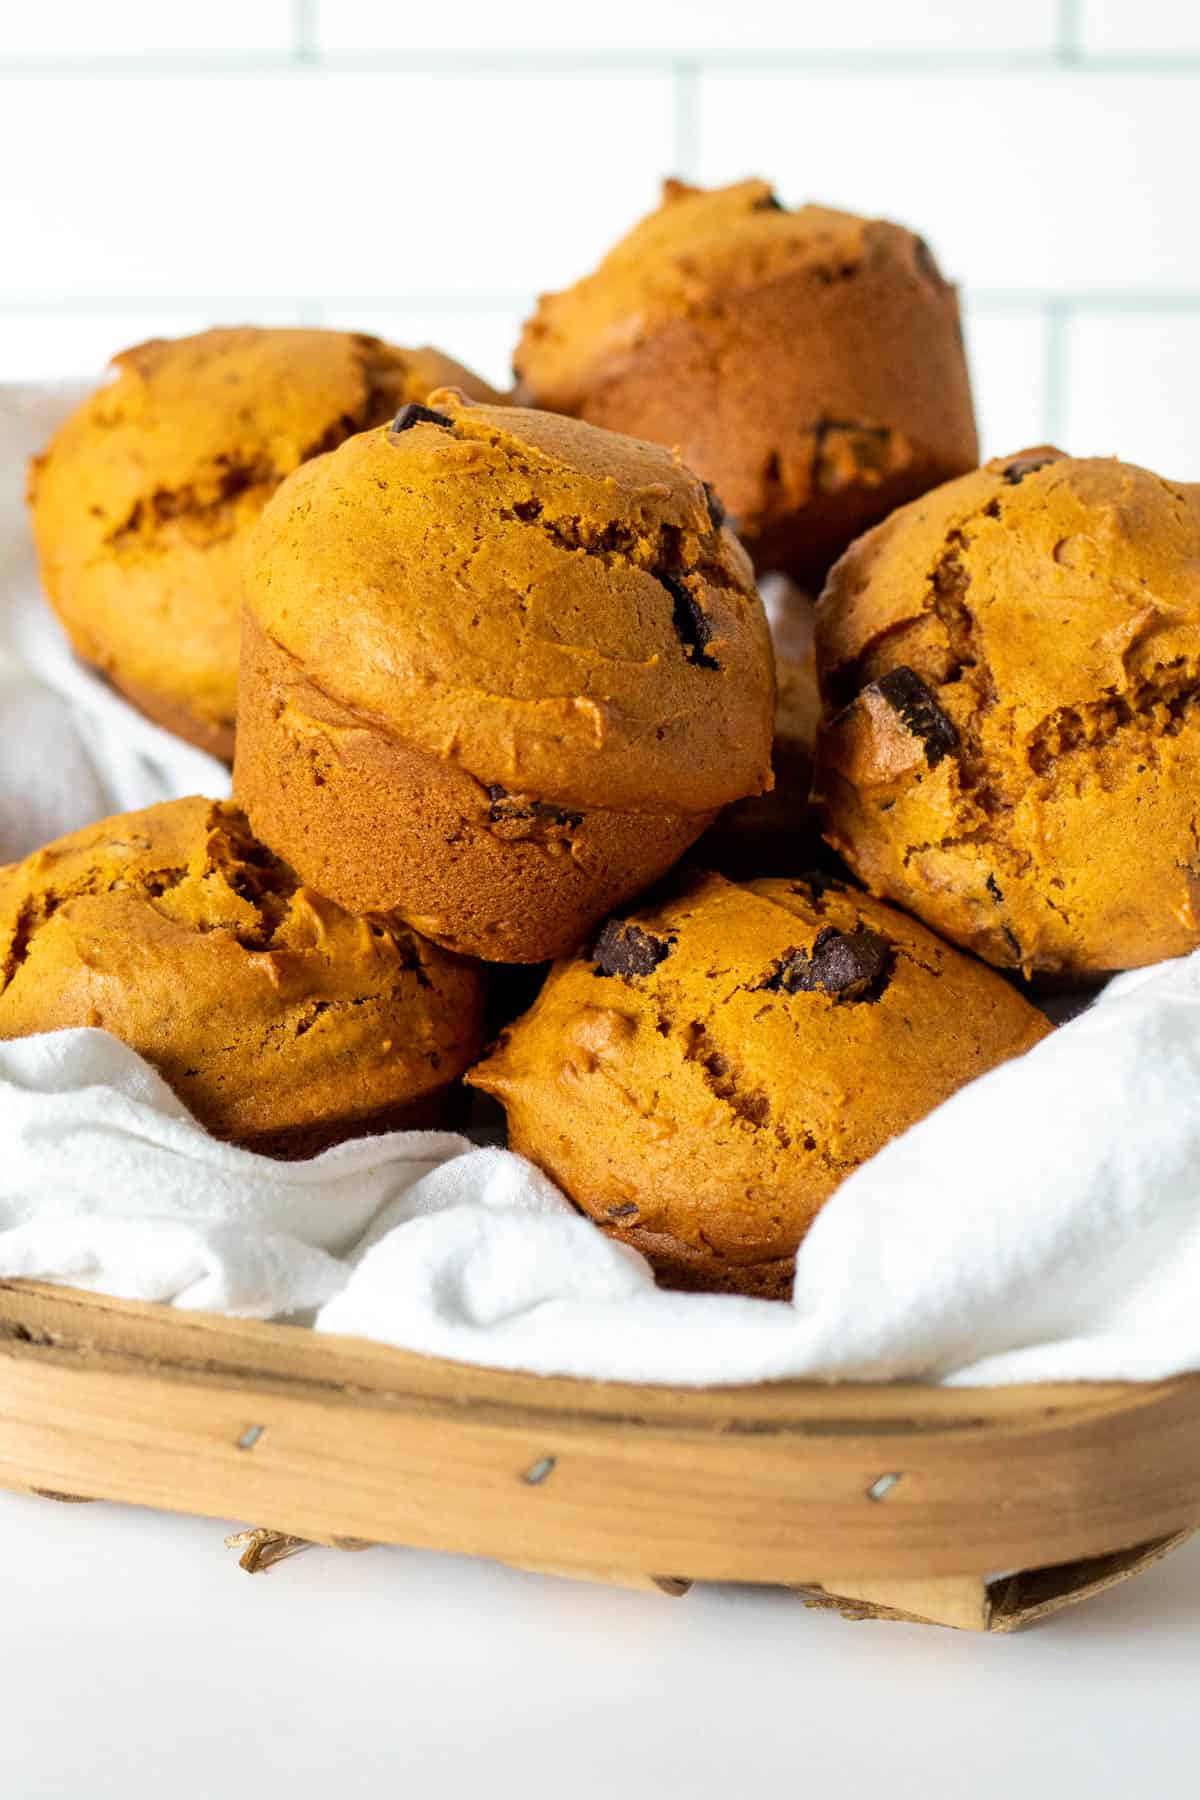 Pumpkin chocolate chip muffins in a basket lined with white towel.